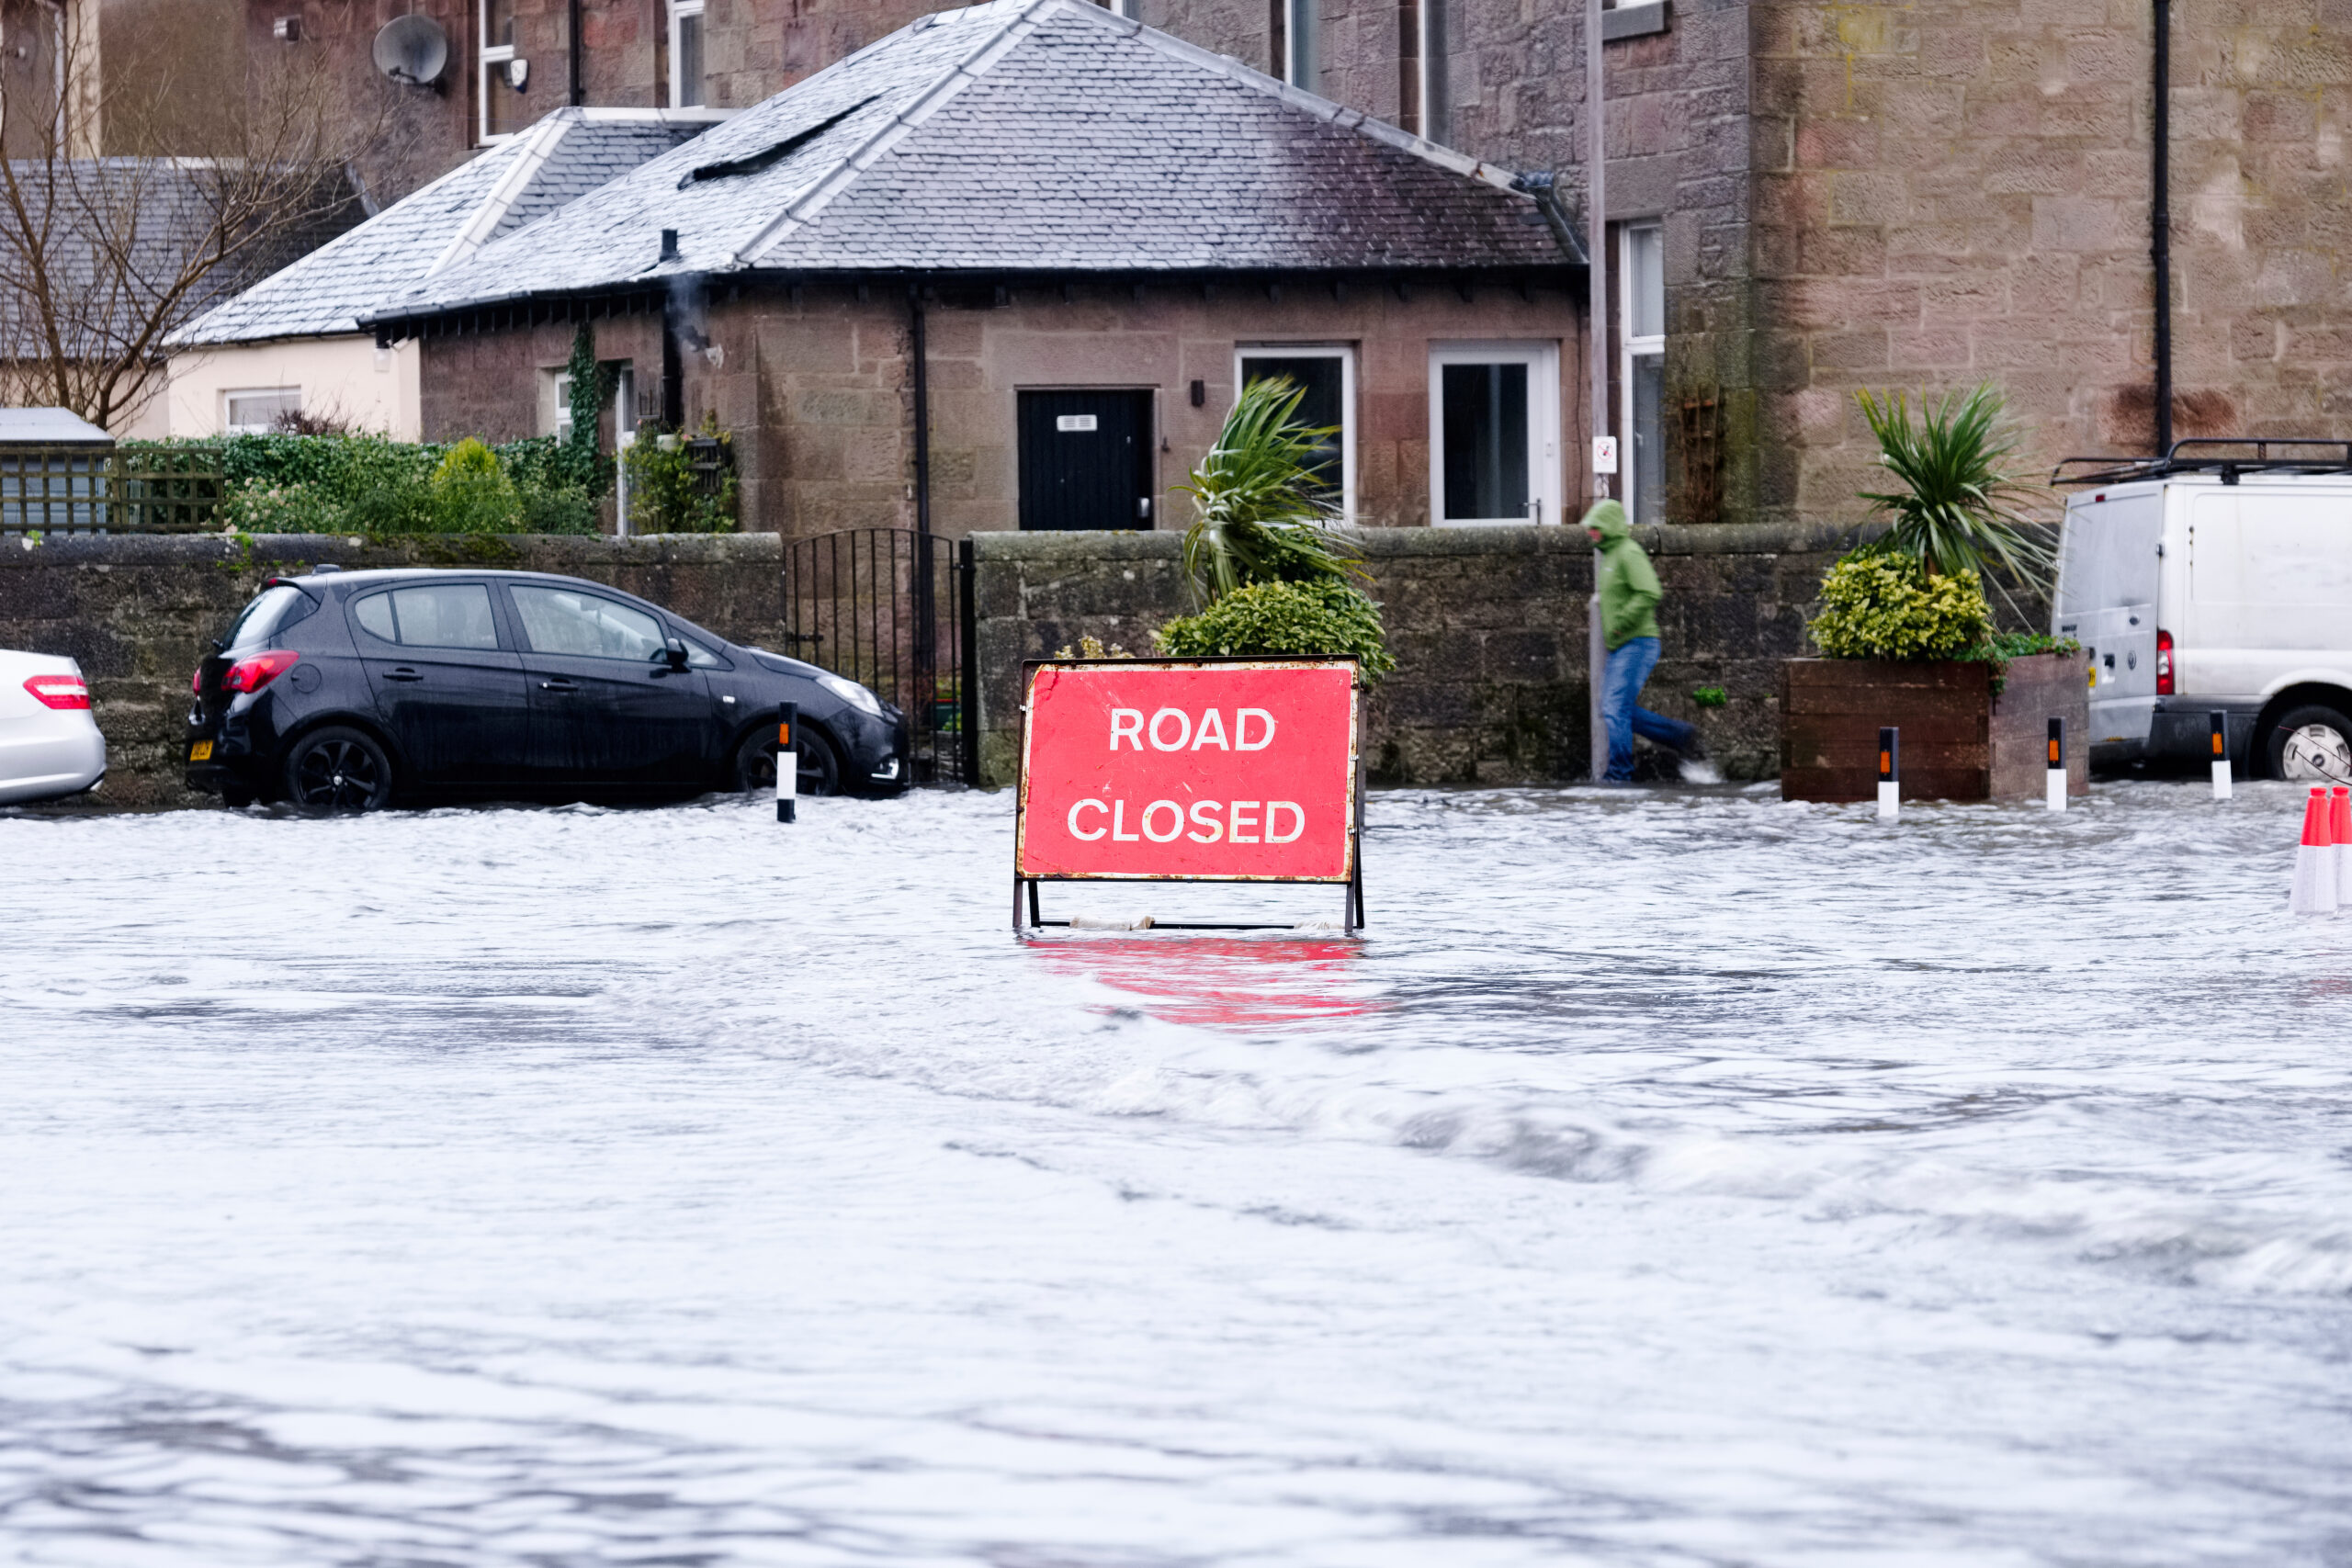 Road flood closed sign under deep water during bad extreme heavy rain storm weather in UK